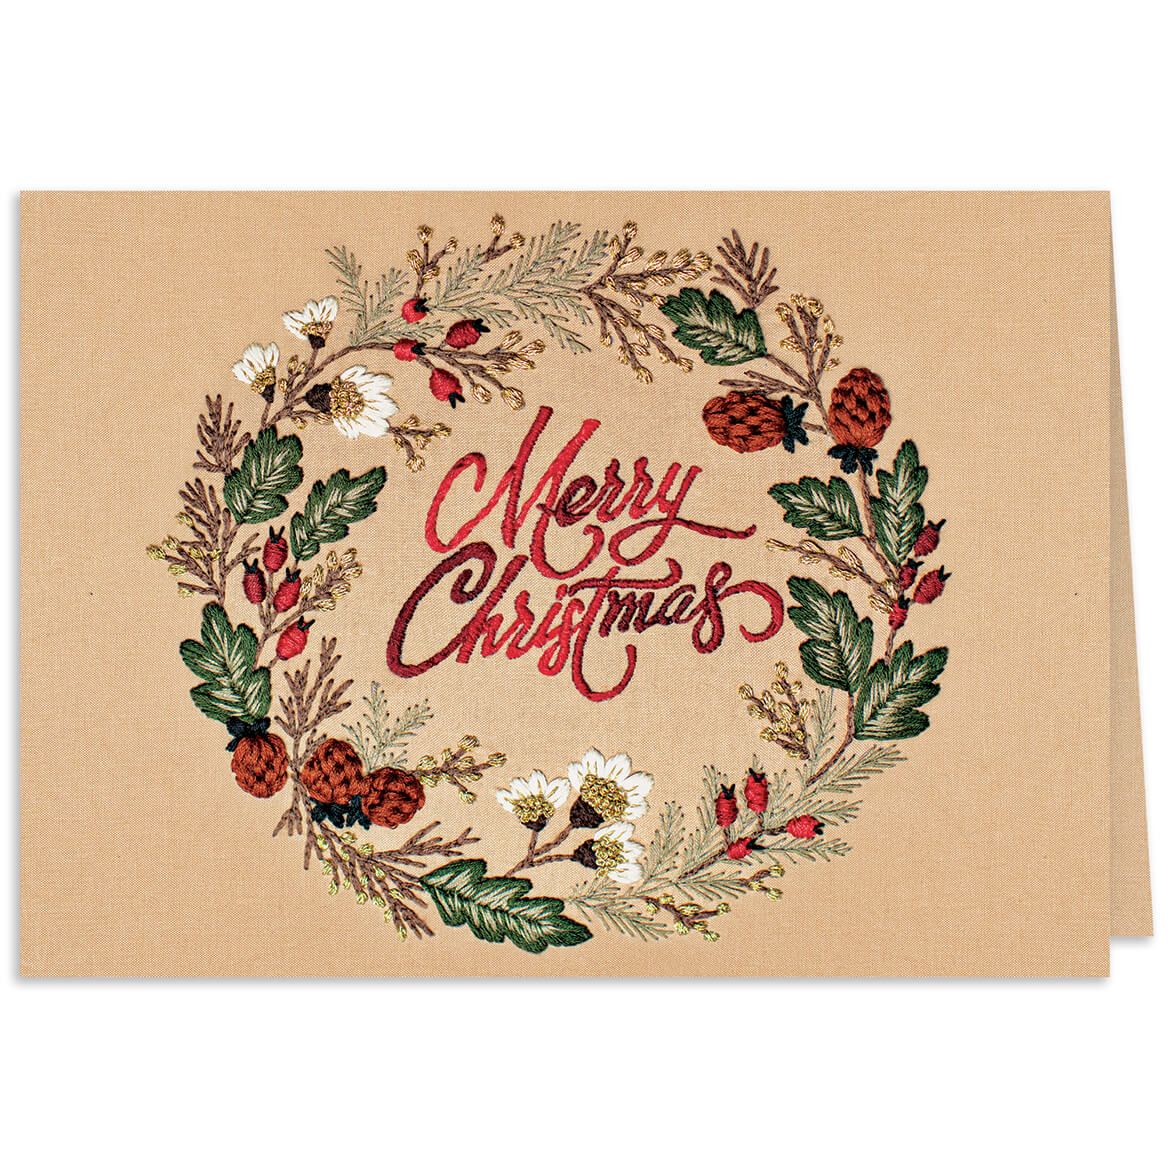 Personalized Embroidered Christmas Wreath Card + '-' + 373673